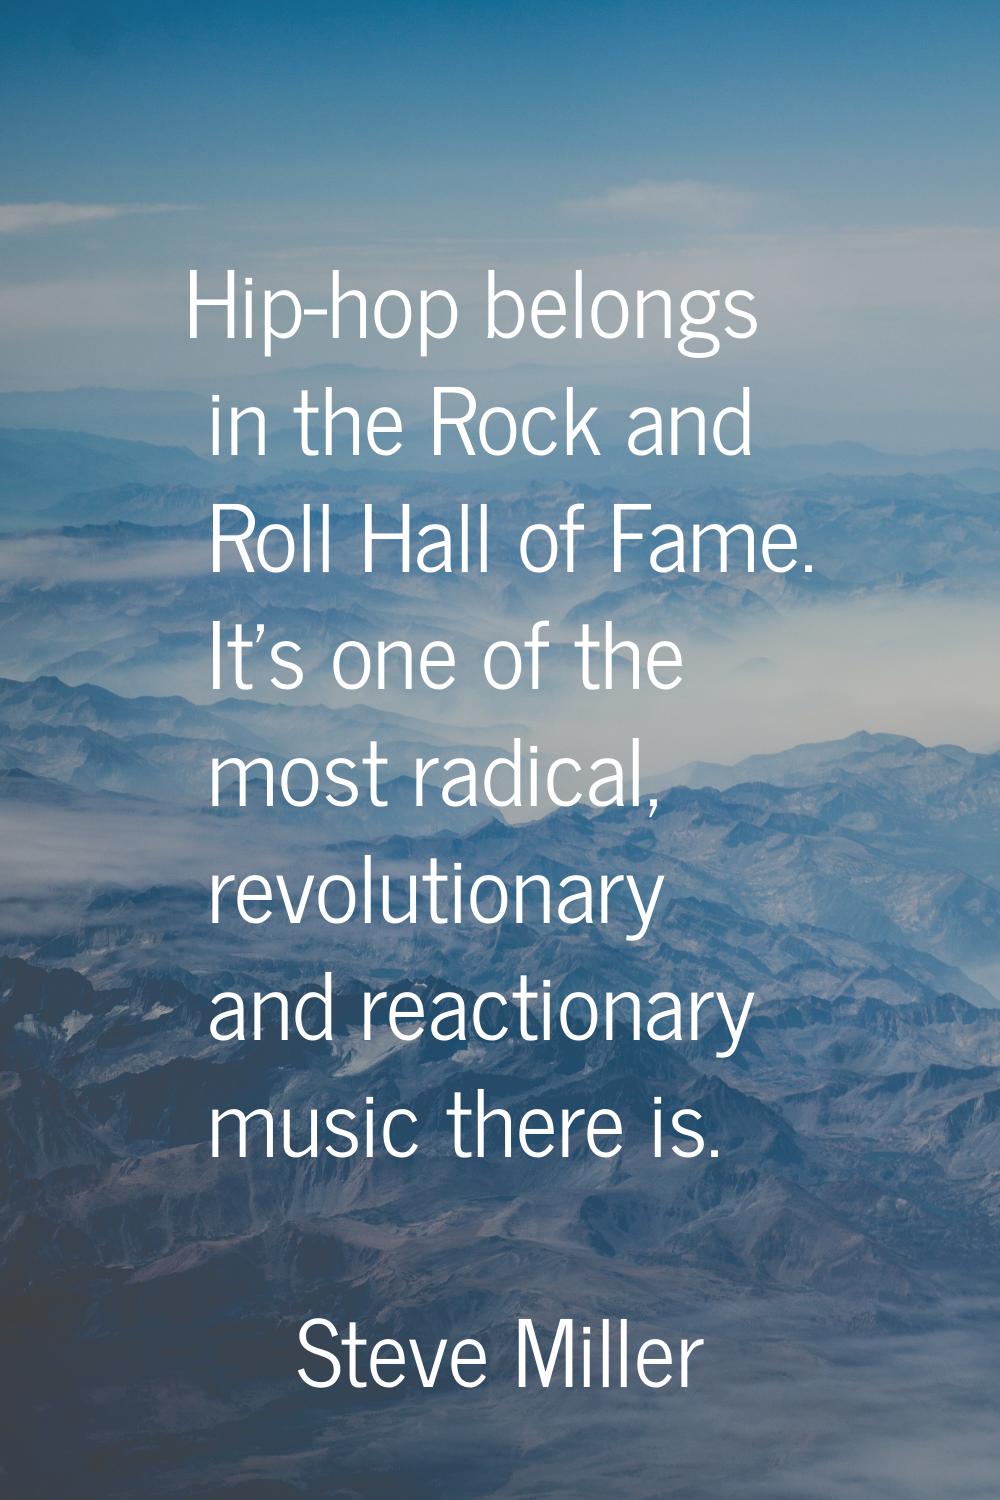 Hip-hop belongs in the Rock and Roll Hall of Fame. It's one of the most radical, revolutionary and 